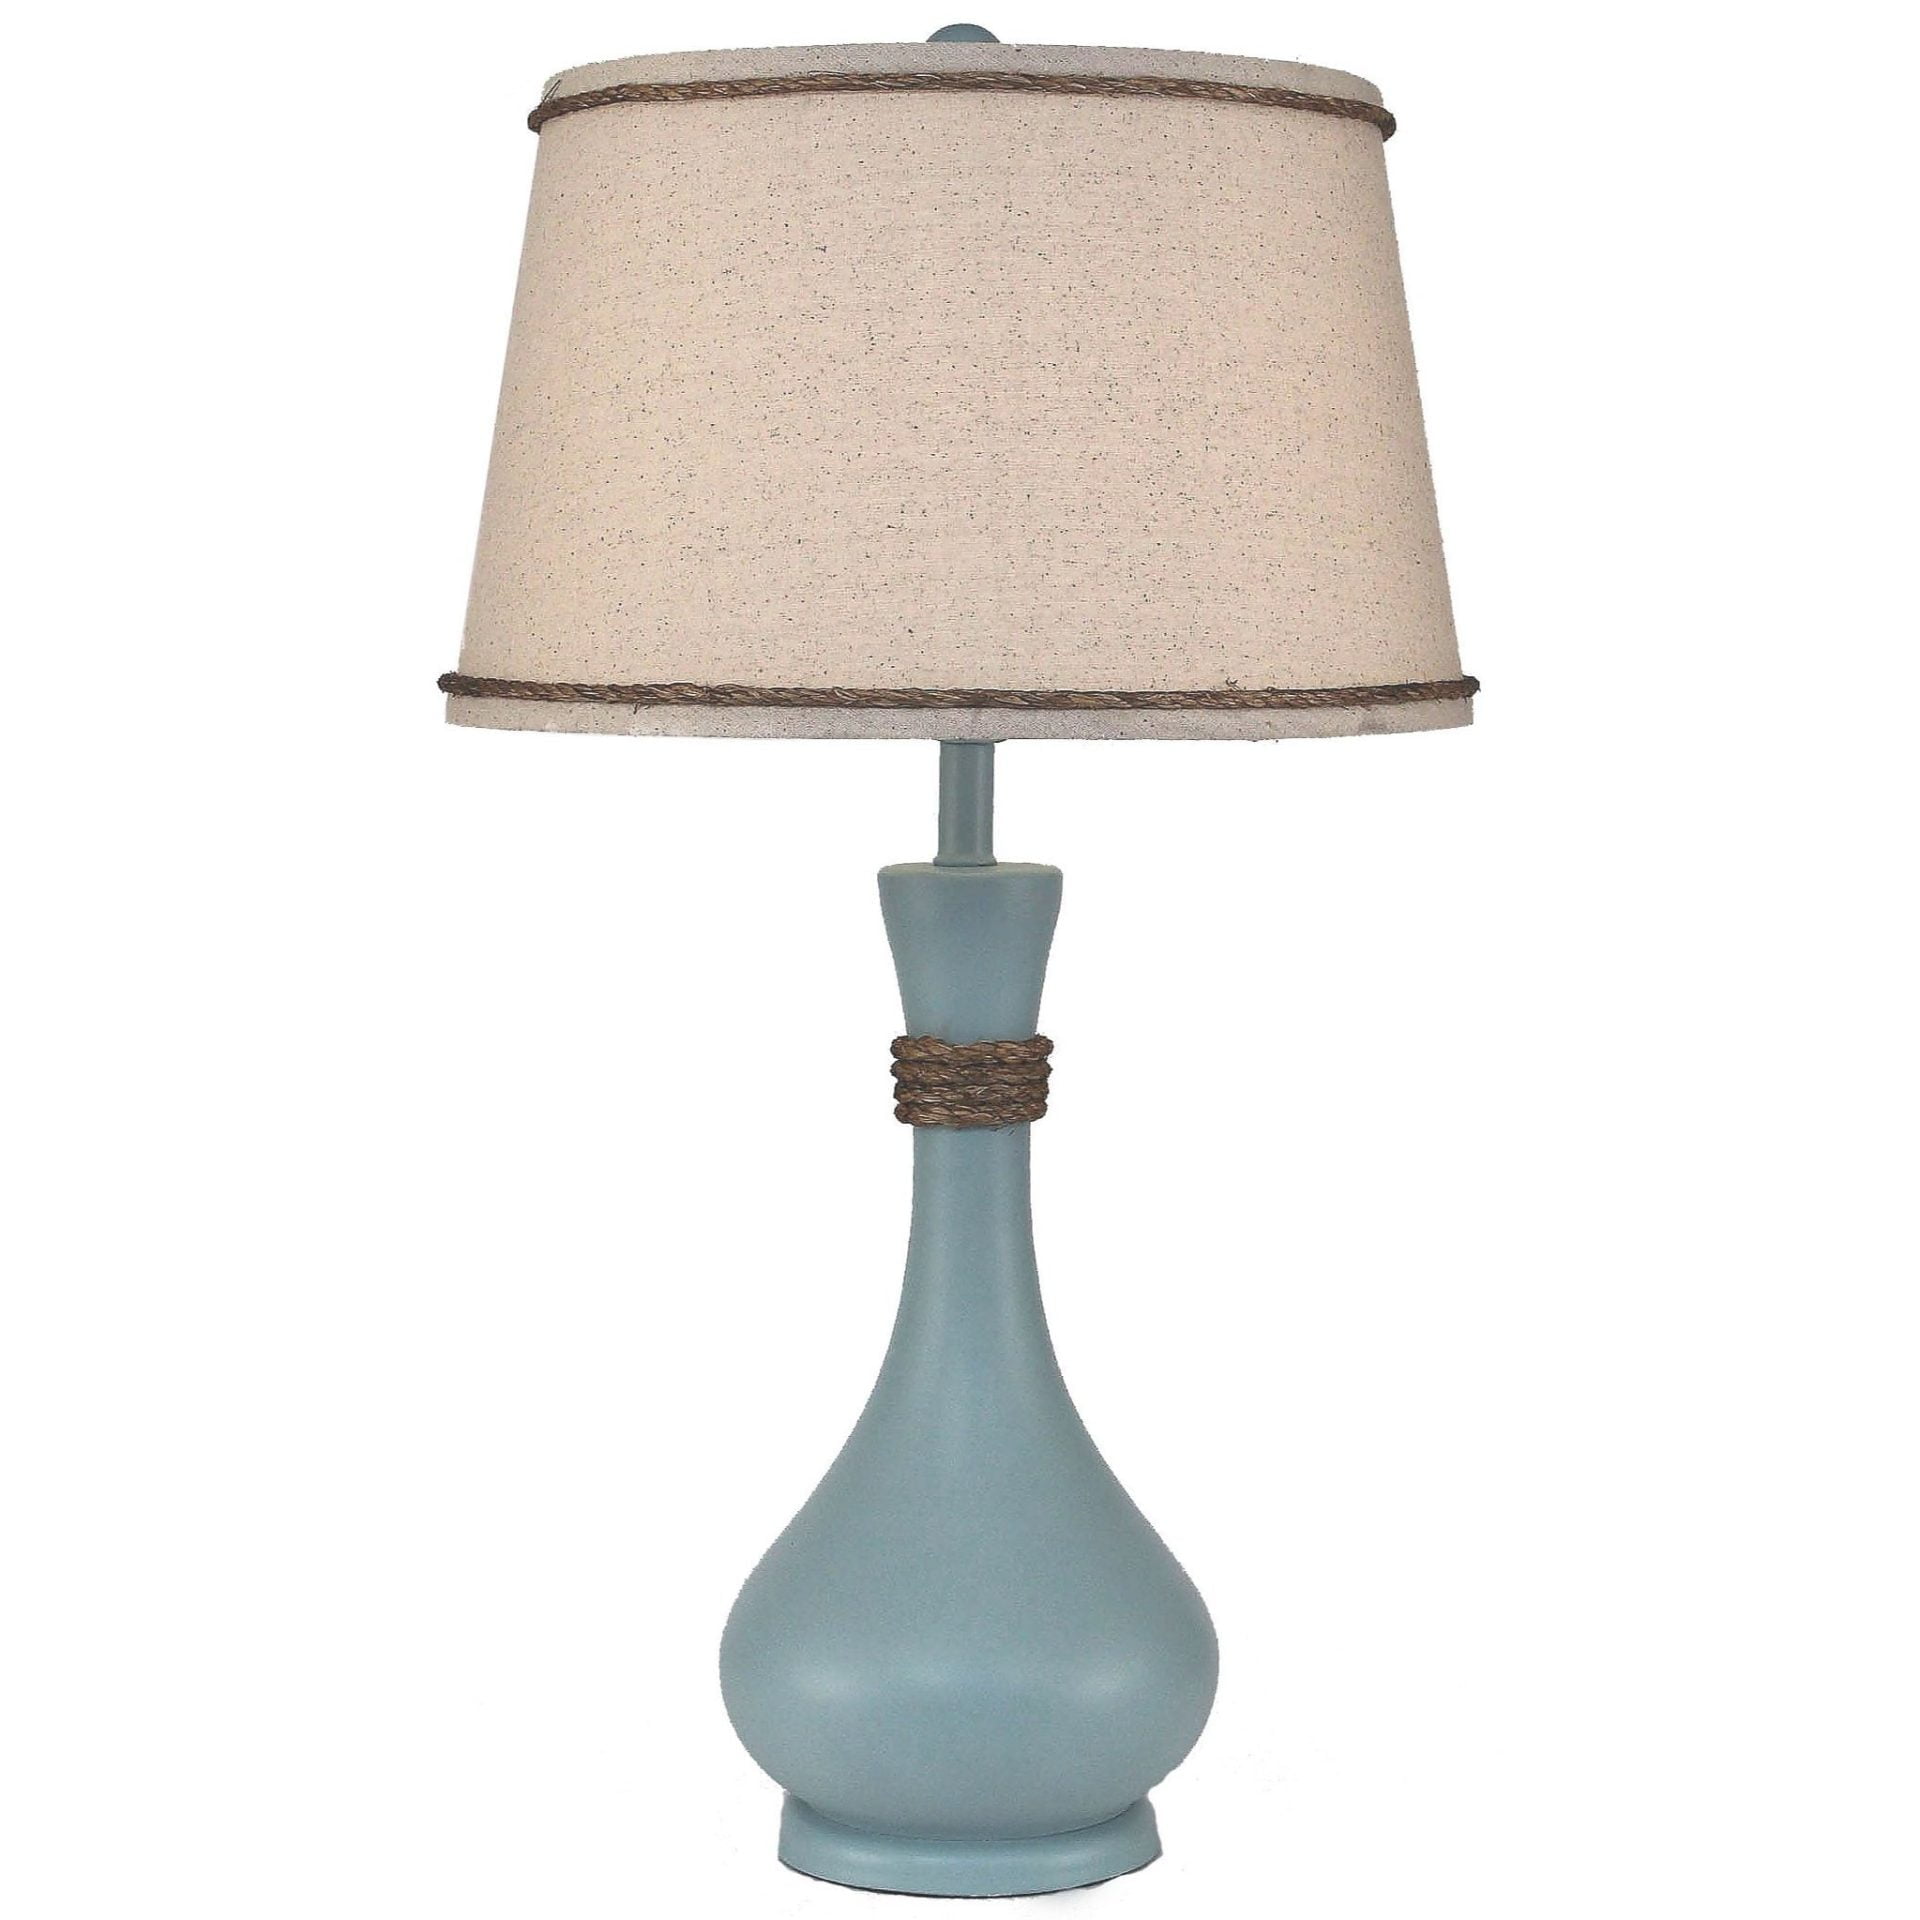 Smooth Genie Bottle Table Lamp with Rope